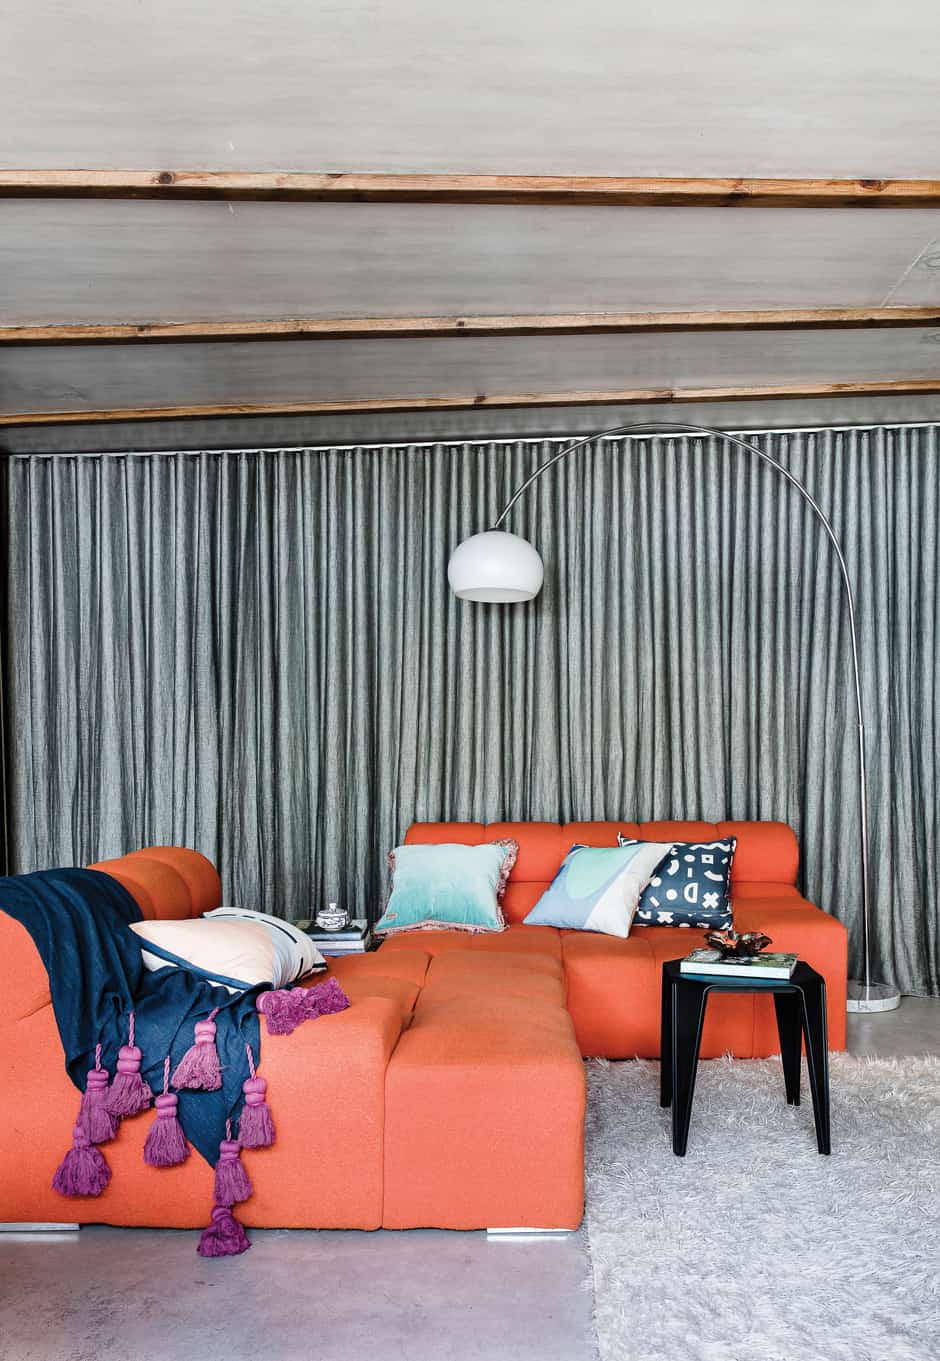 LIVING A sheer linen curtain creates a sense of privacy while letting in a little light, while the Tufty-Time sofa designed by Patricia Urquiola for B&B Italia provides a colourful retro element teamed with cushions from Life Interiors and a Kip & Co throw. On the shelf is the self-portrait by Susanna’s mother (far right) that inspired Susanna to take the plunge into illustrating; the purple piece beside it is by New Zealand artist Tracey Tawhiao.